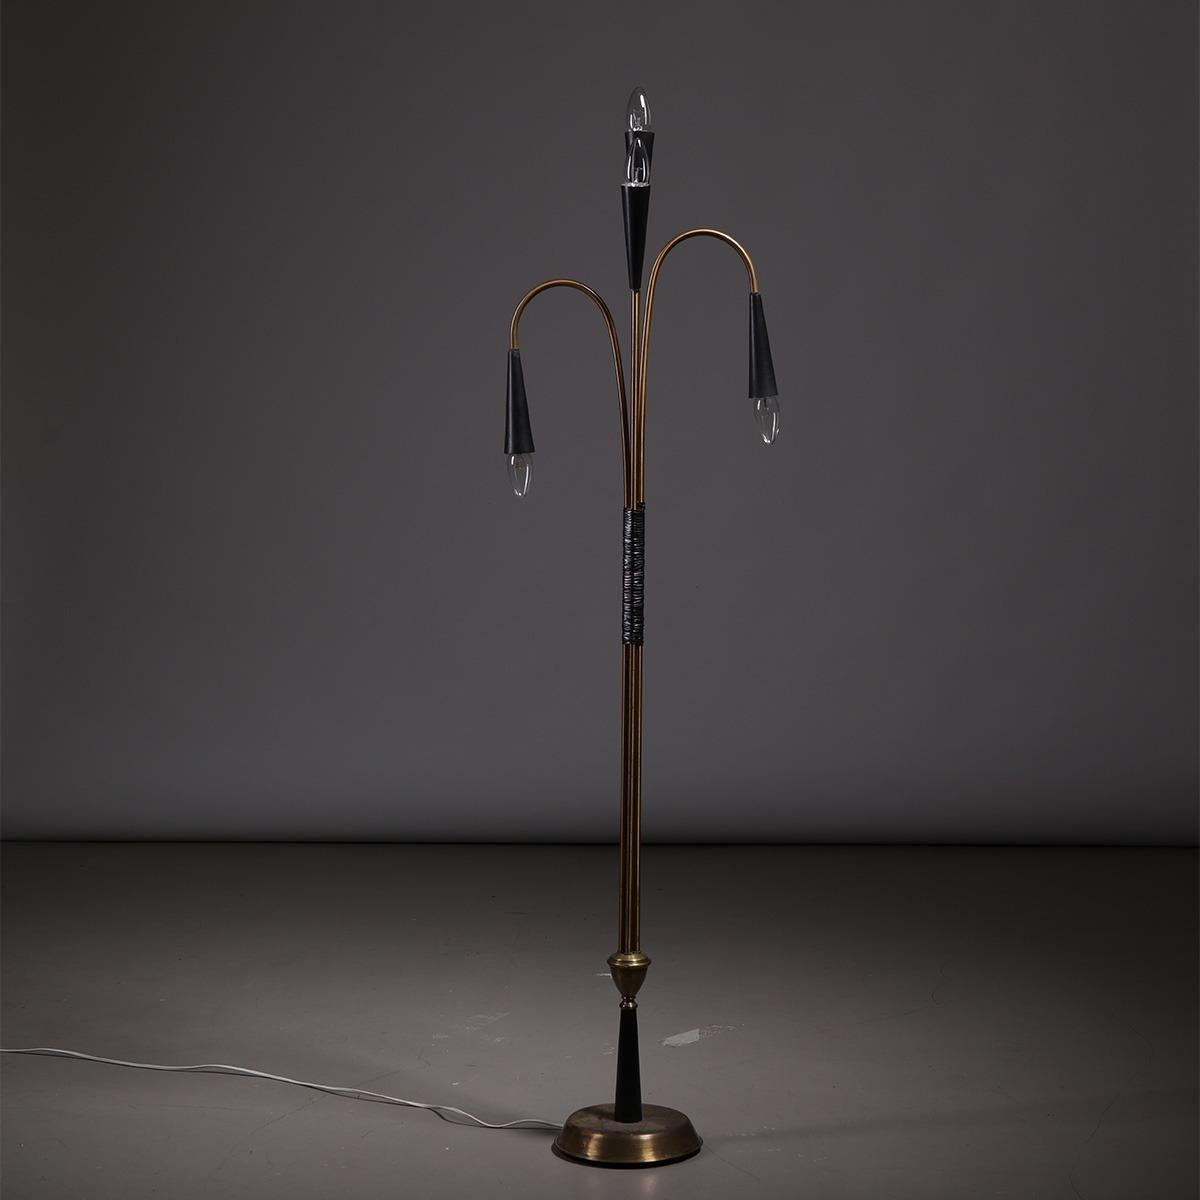 Rare sculptural brass floor lamp designed by Oscar Torlasco for Lumi in Italy, 1960s.

Being a very rare model designed by the renowned Italian designer, this lamp features a unique sculptural brass frame where in the middle, part of the stem is